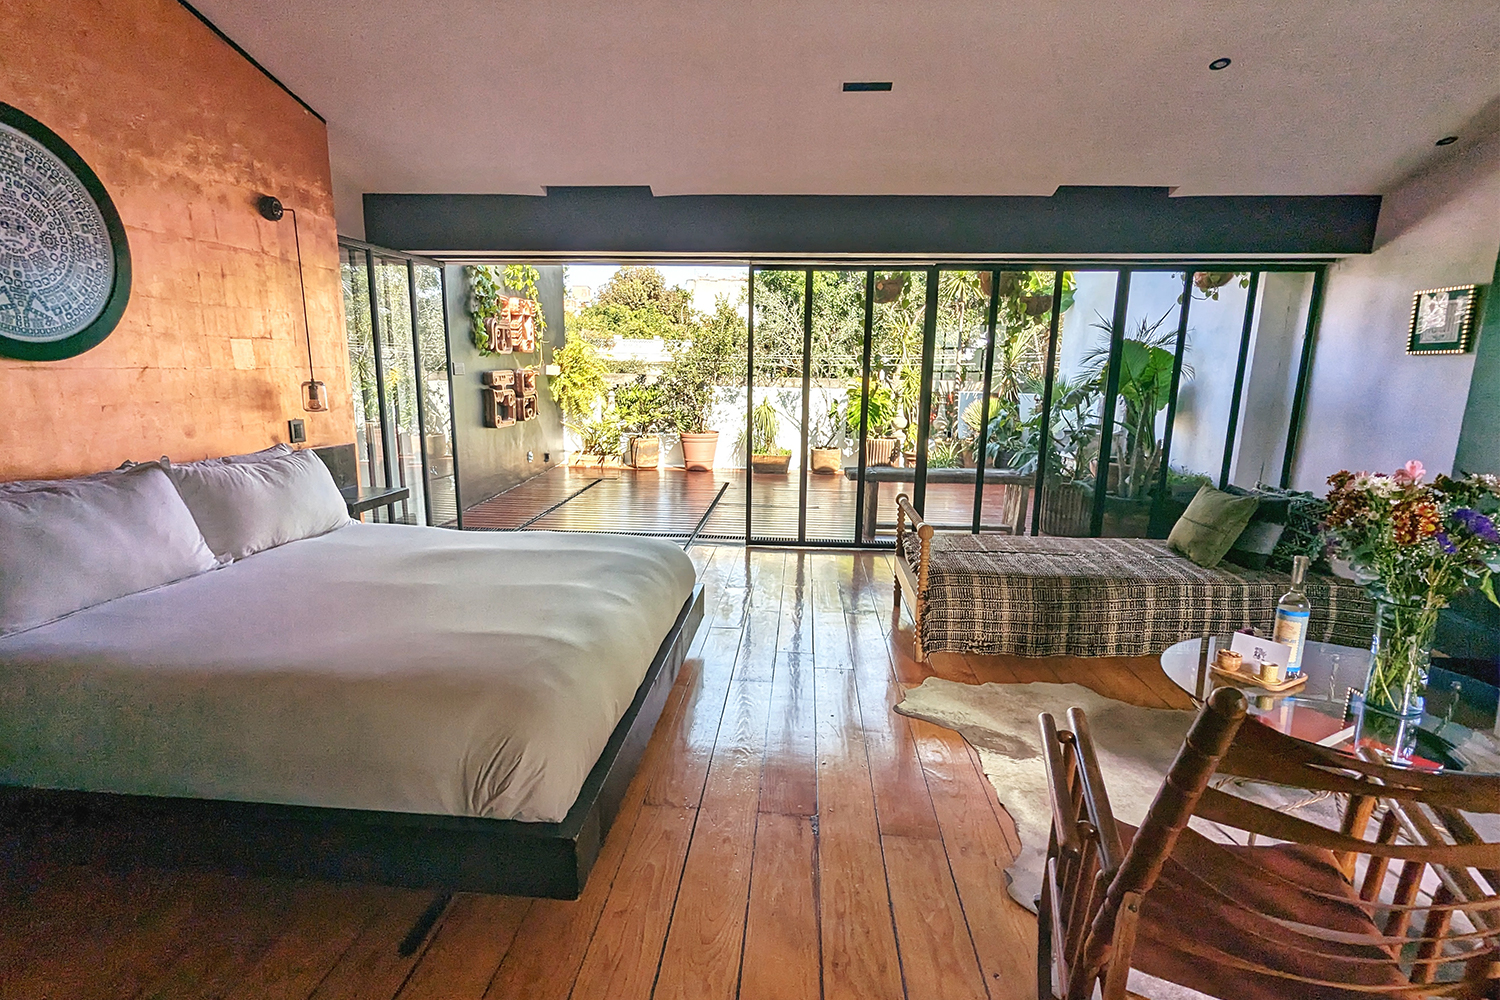 A room at La Valise CDMX, a boutique hotel in Mexico City. La Terraza room features a bed that slides onto a terrace.